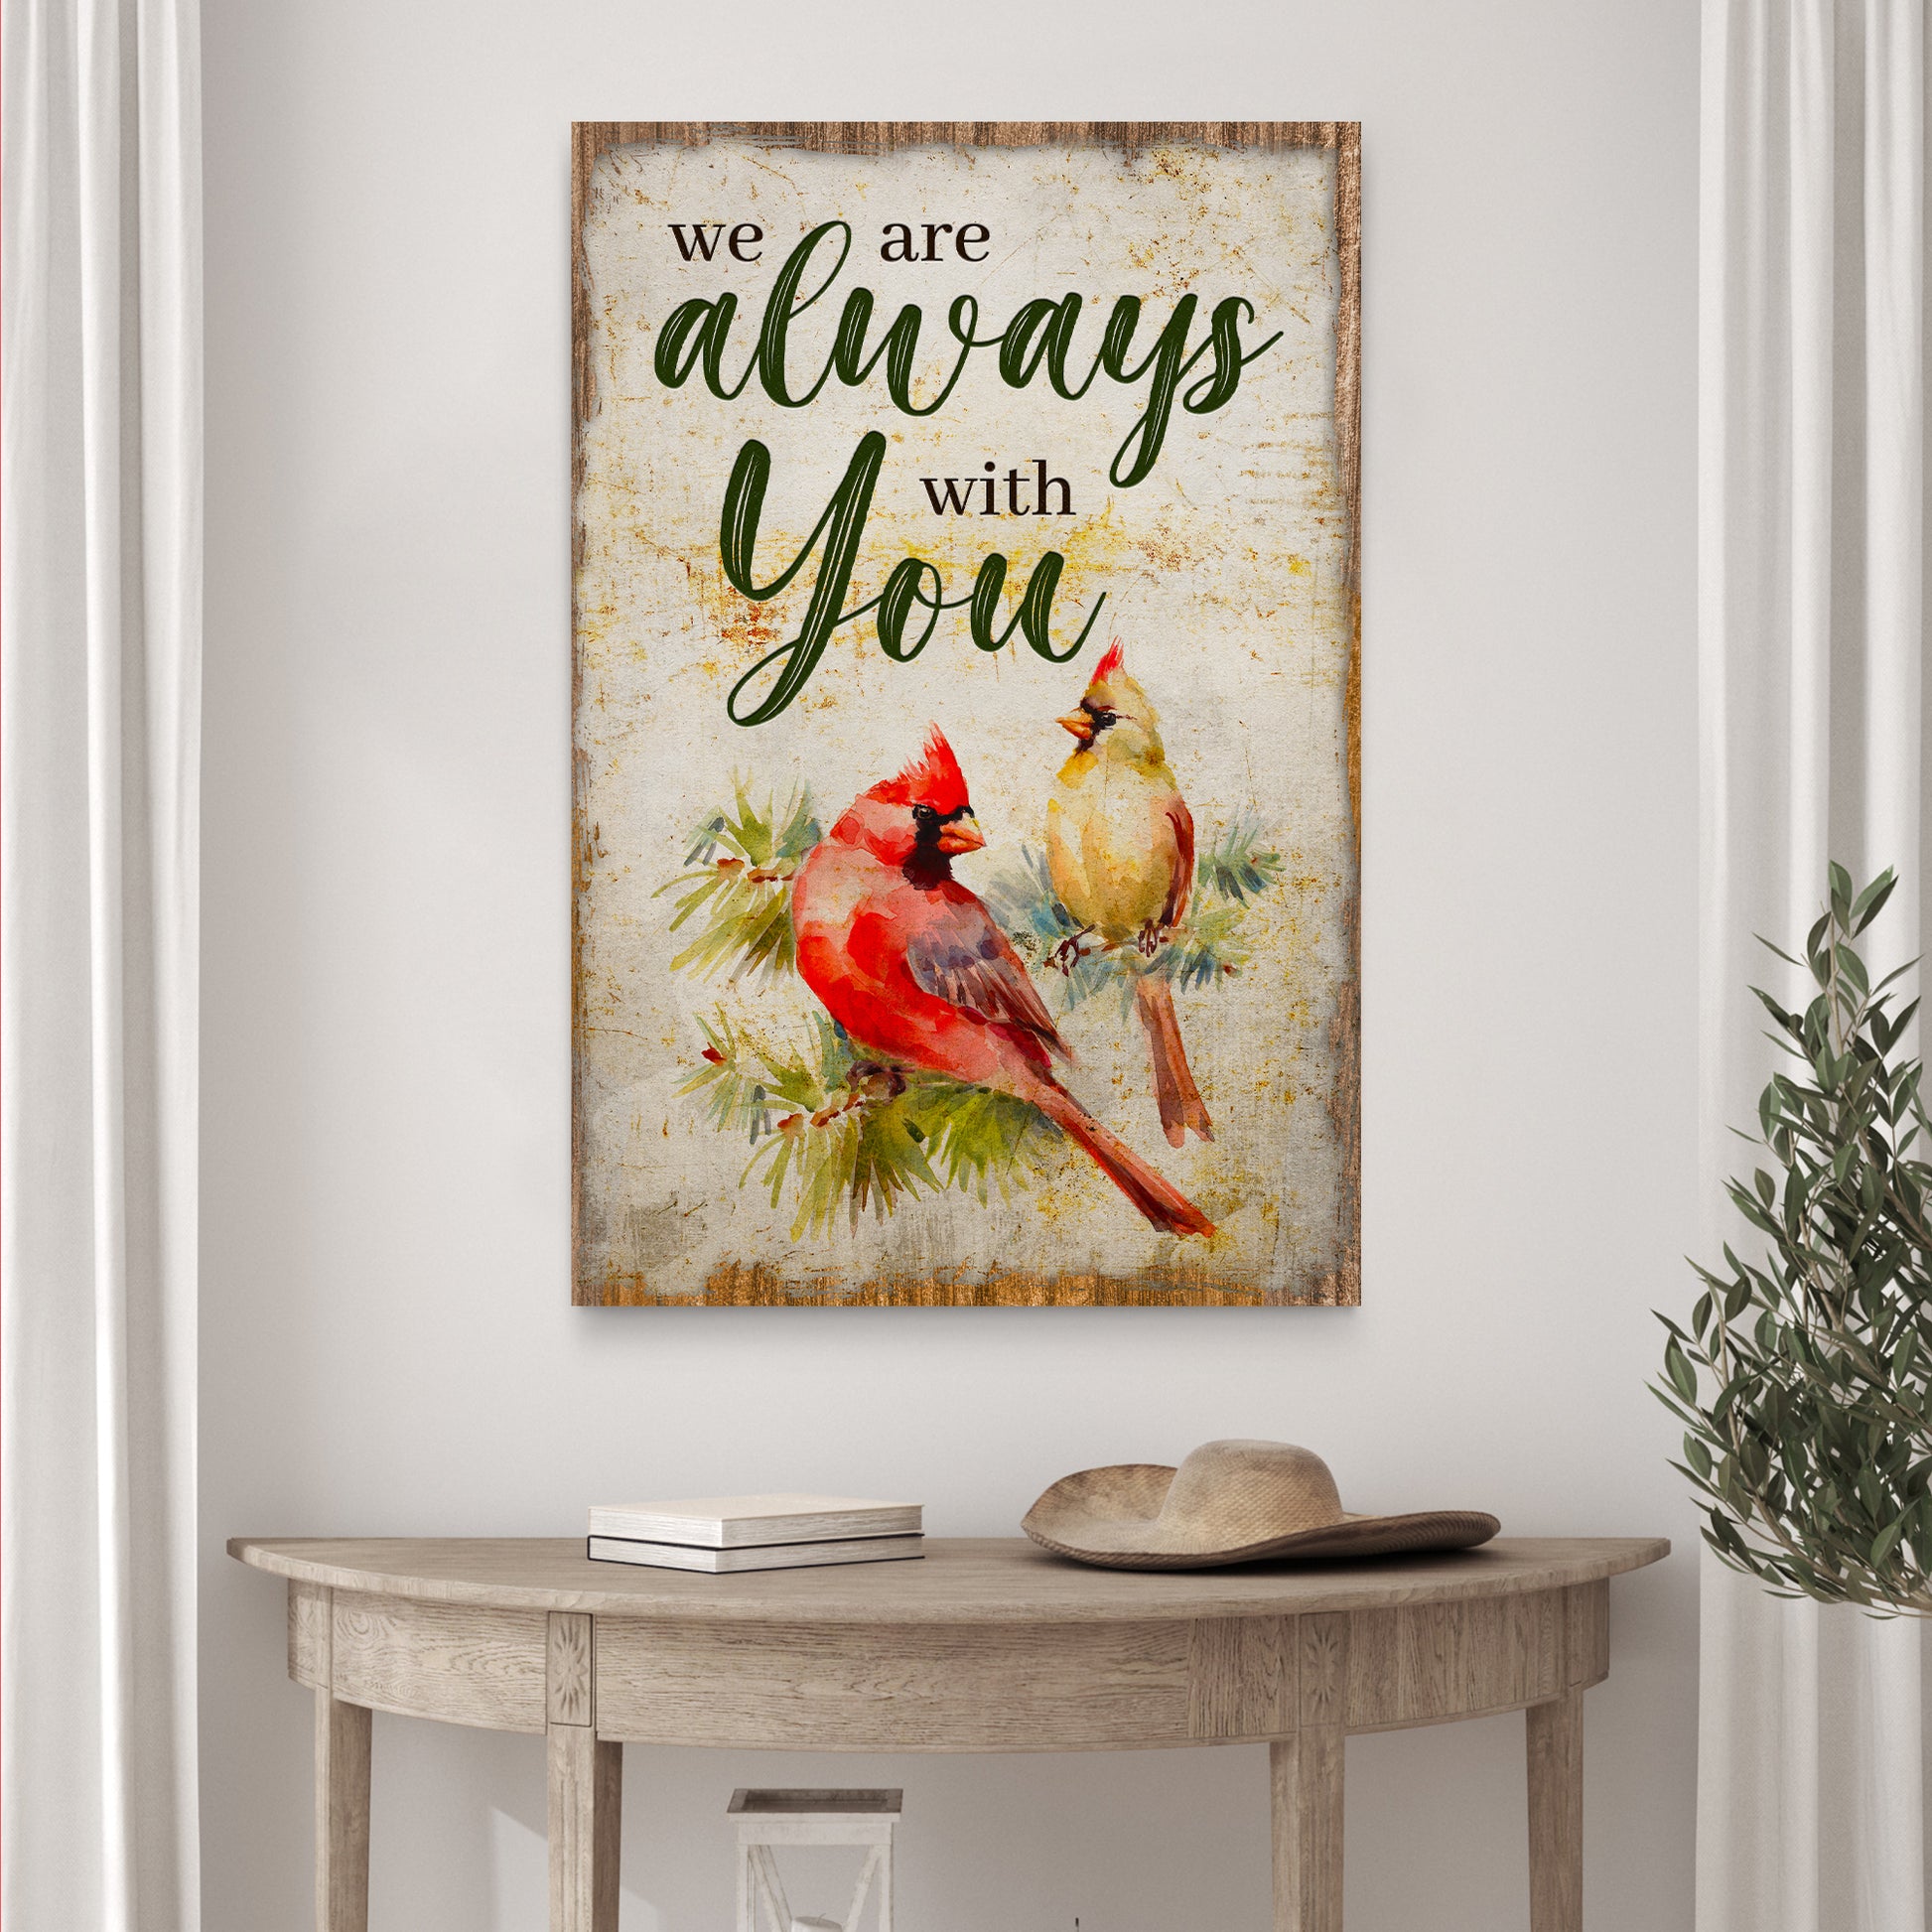 We Are Always With You Sign - Image by Tailored Canvases